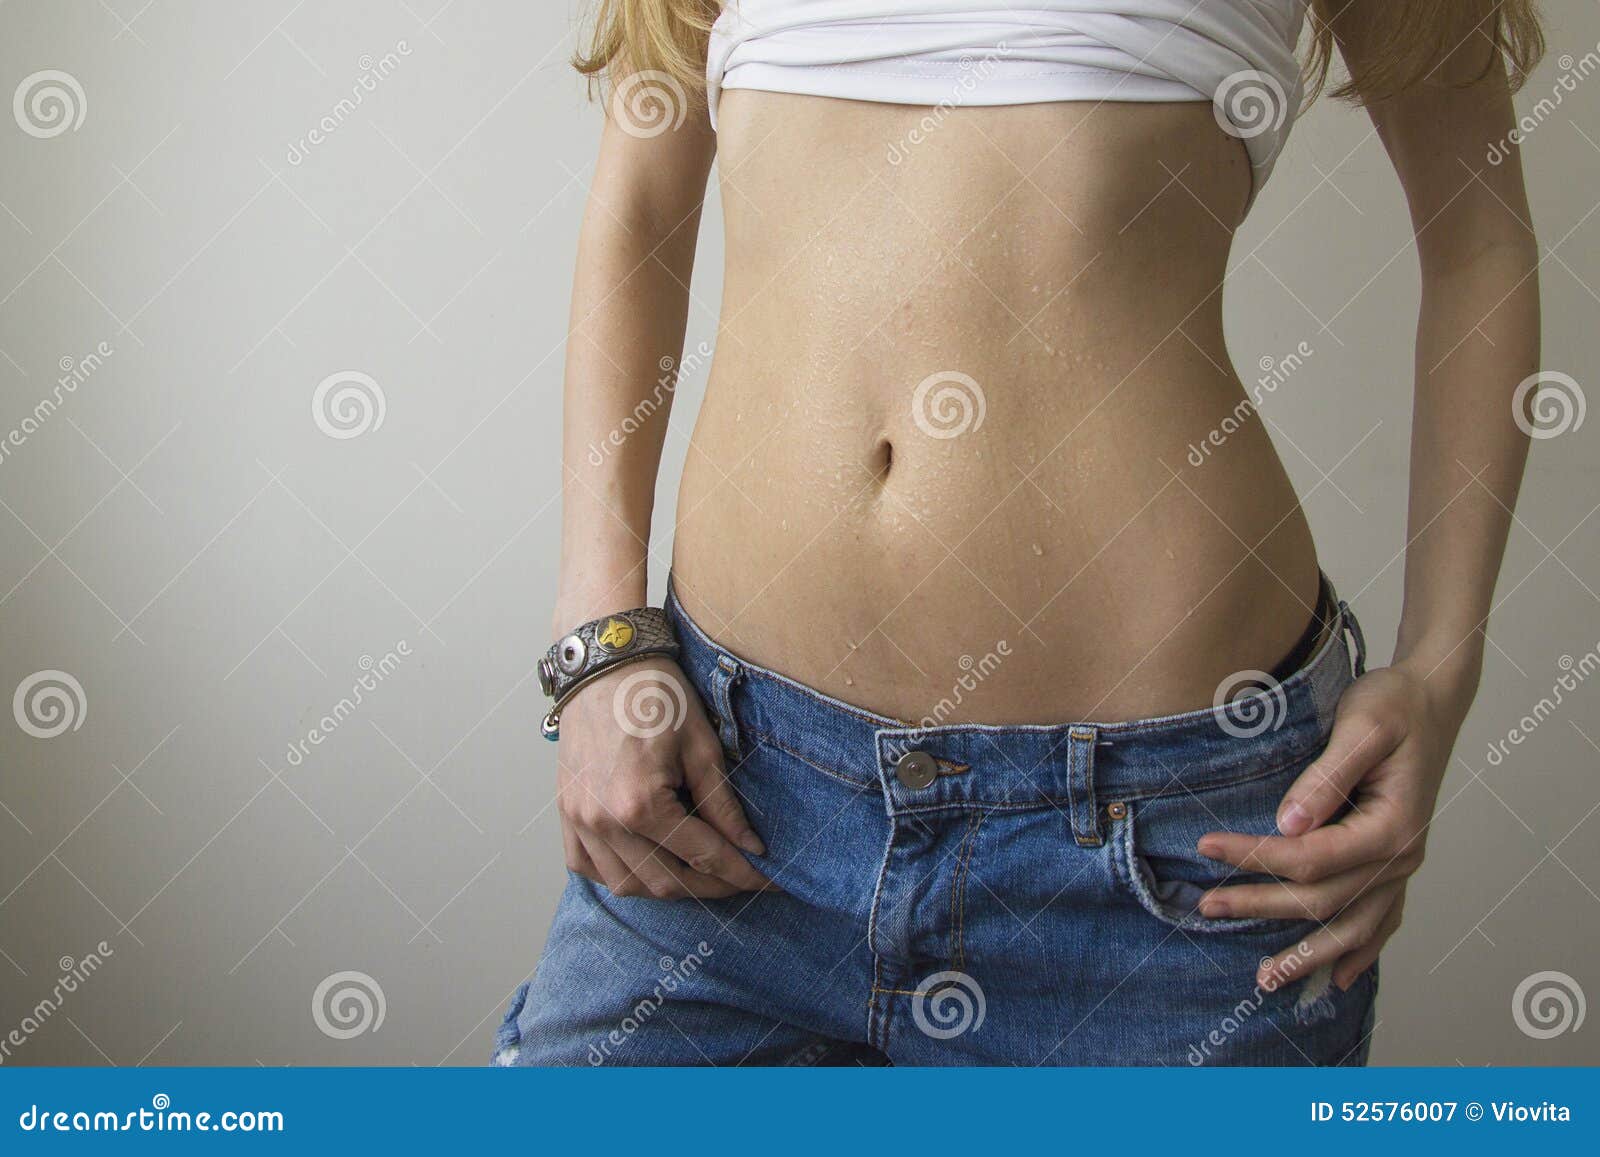 Wet Stomach In Jeans Stock Image Image Of Dieting Shirt 52576007